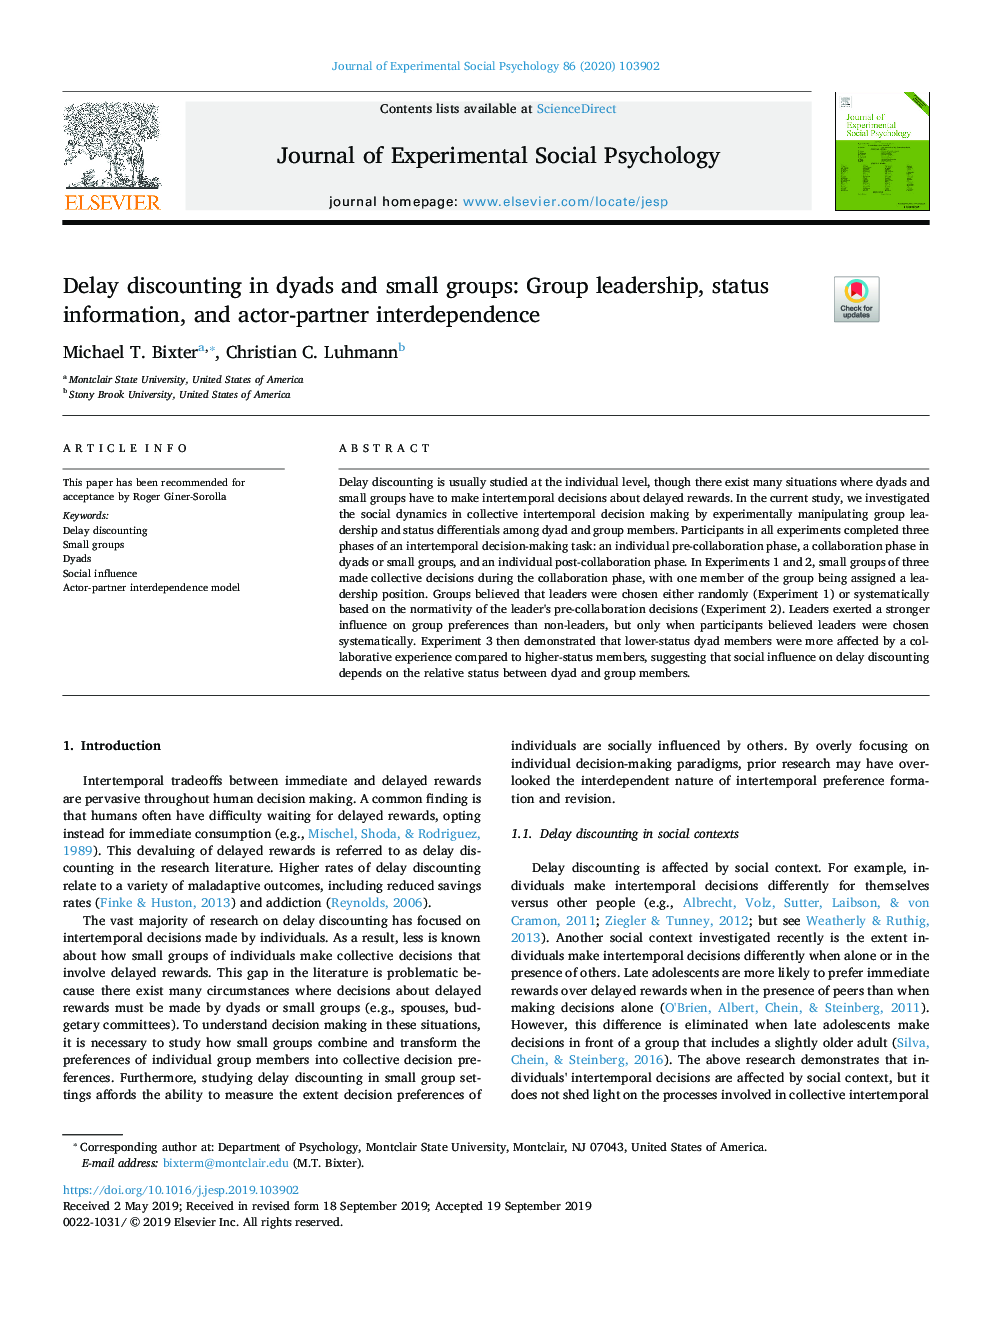 Delay discounting in dyads and small groups: Group leadership, status information, and actor-partner interdependence